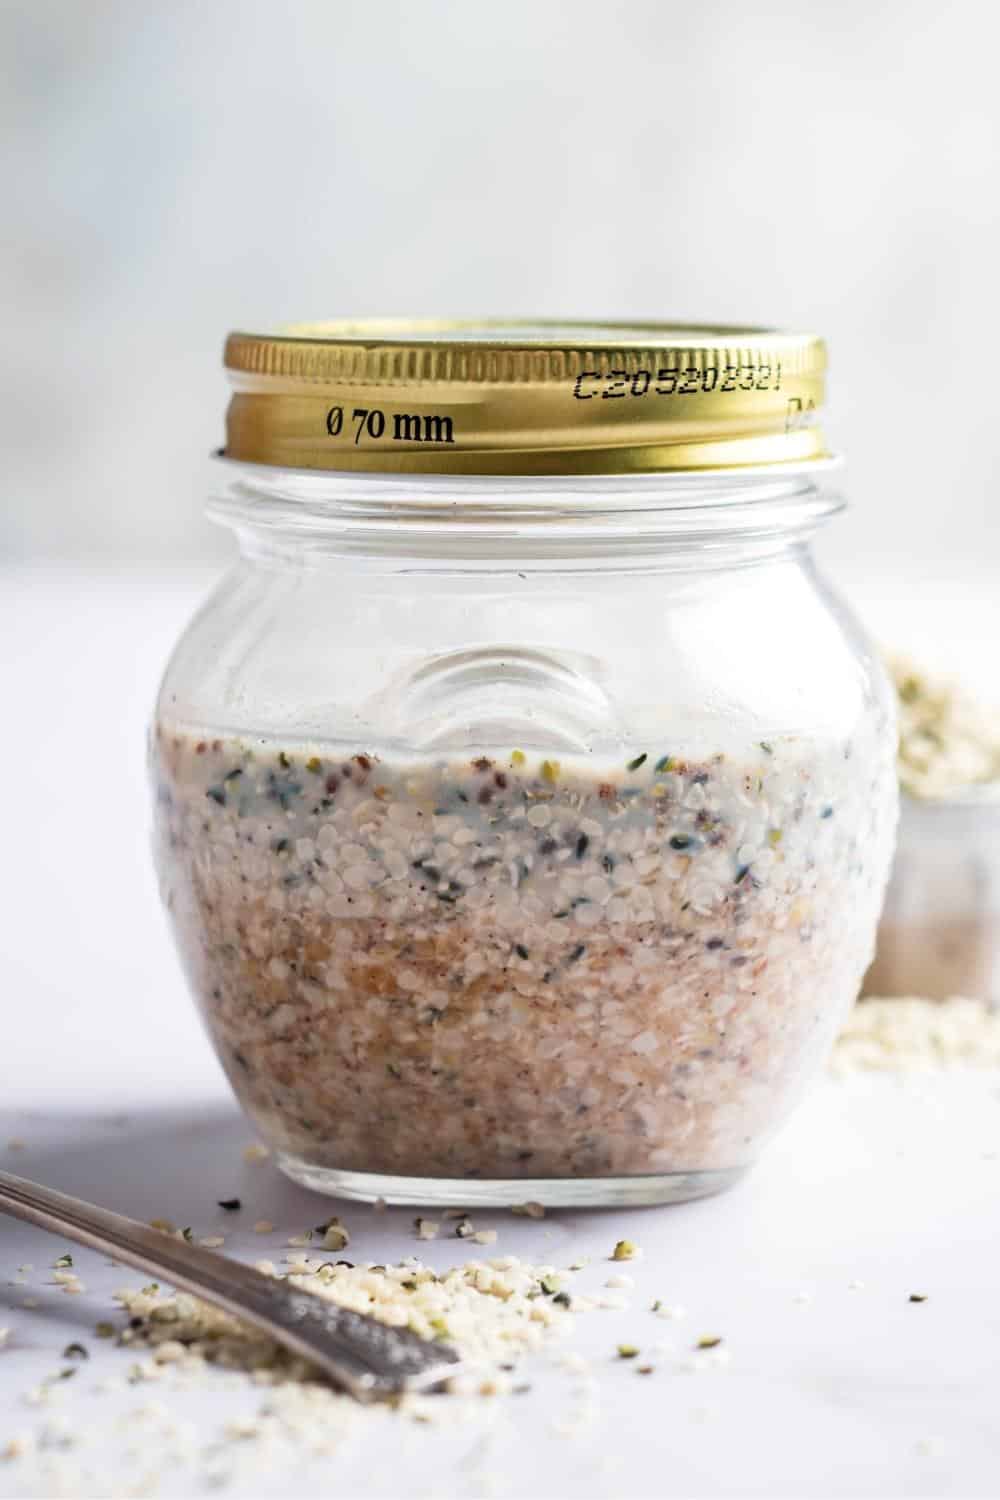 Sealed glass jar that is filled with low carb overnight oats.